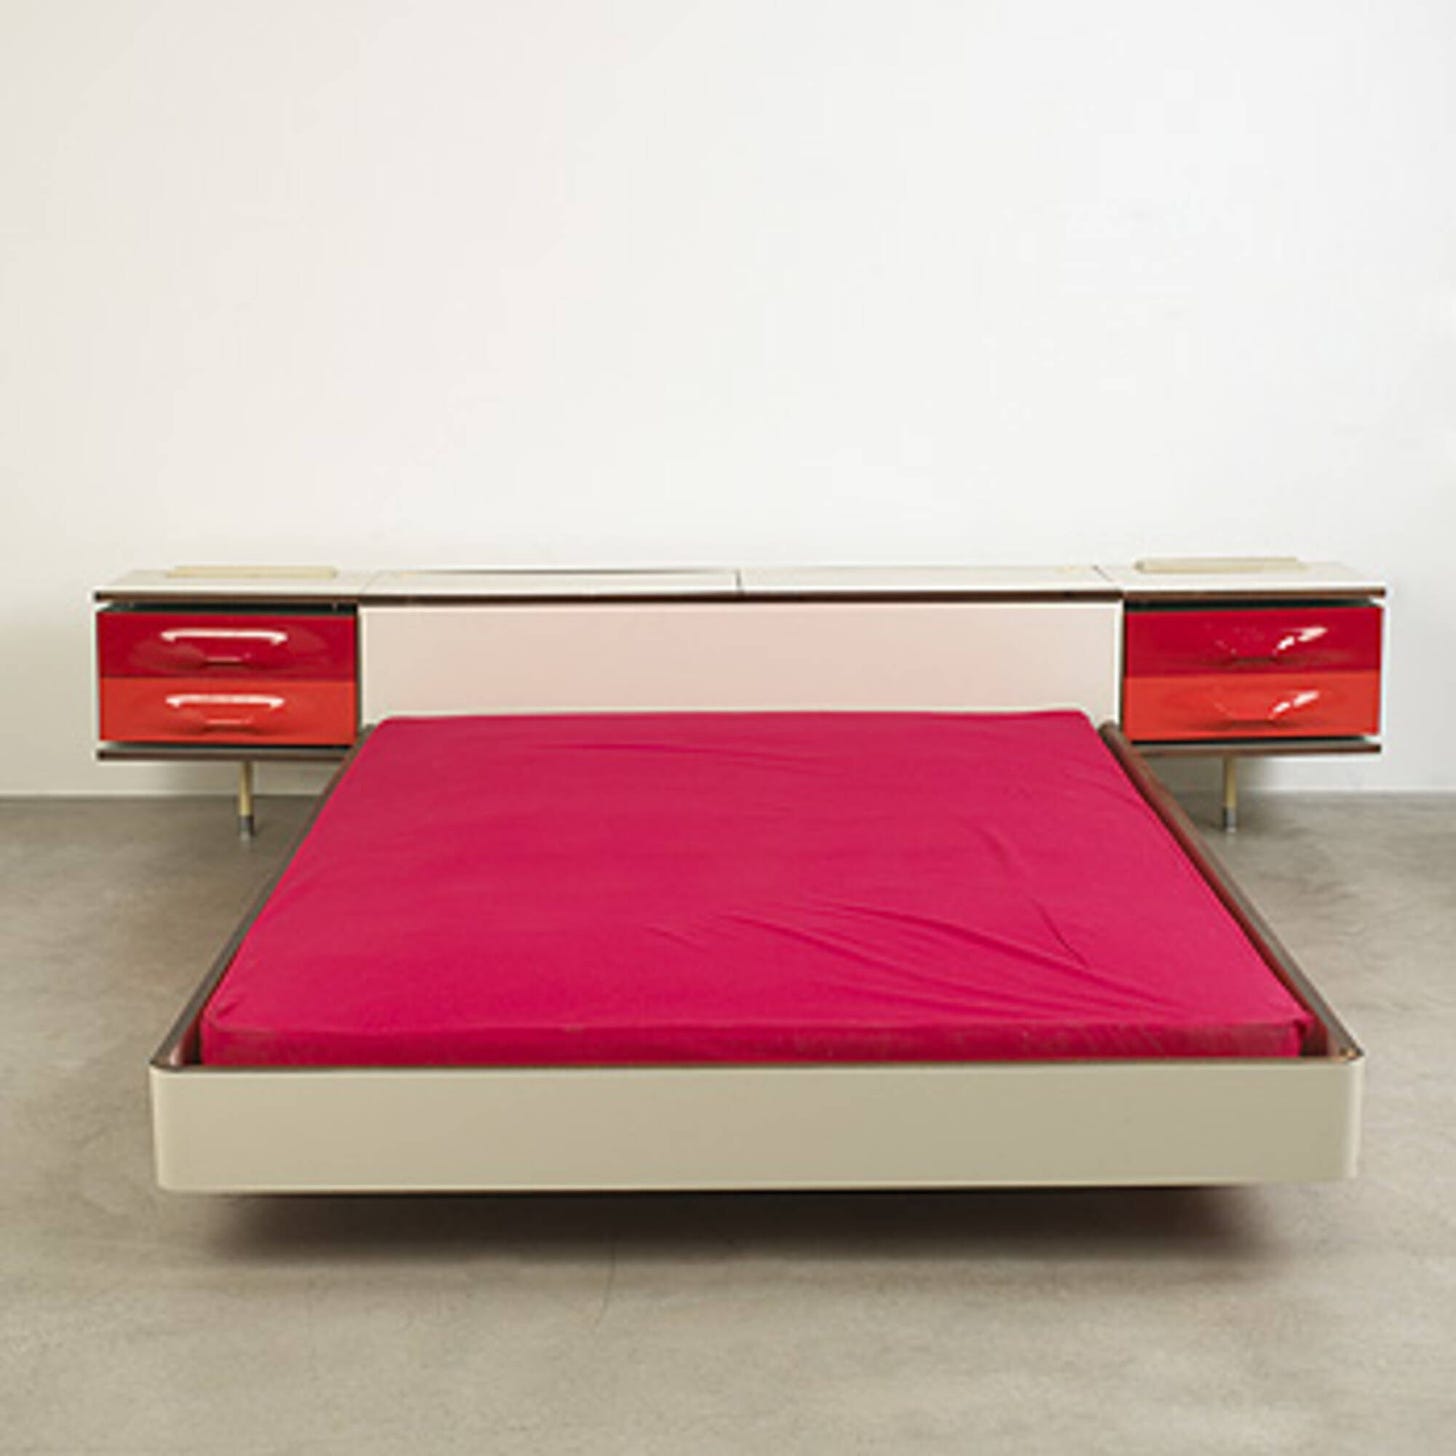 497: RAYMOND LOEWY, DF-2000 bed < Modernist 20th Century, 22 May 2005 <  Auctions | Wright: Auctions of Art and Design